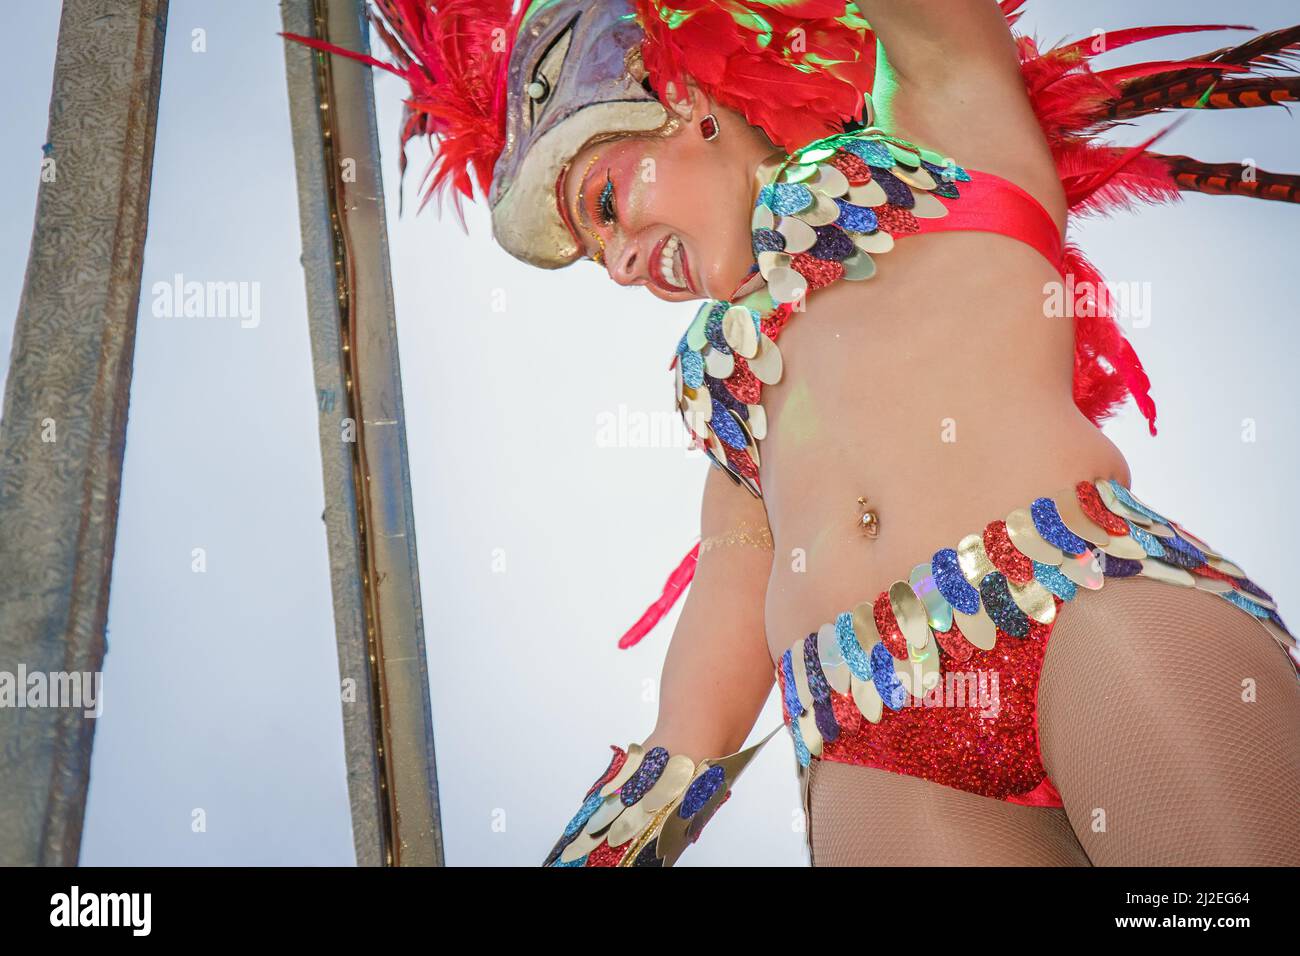 Portugal Carnaval - Grupo Costa de Prata - Ovar 2016 Carnival parade in Ovar. Young smiling woman performing in Brazilian style red-feathered costume. Stock Photo